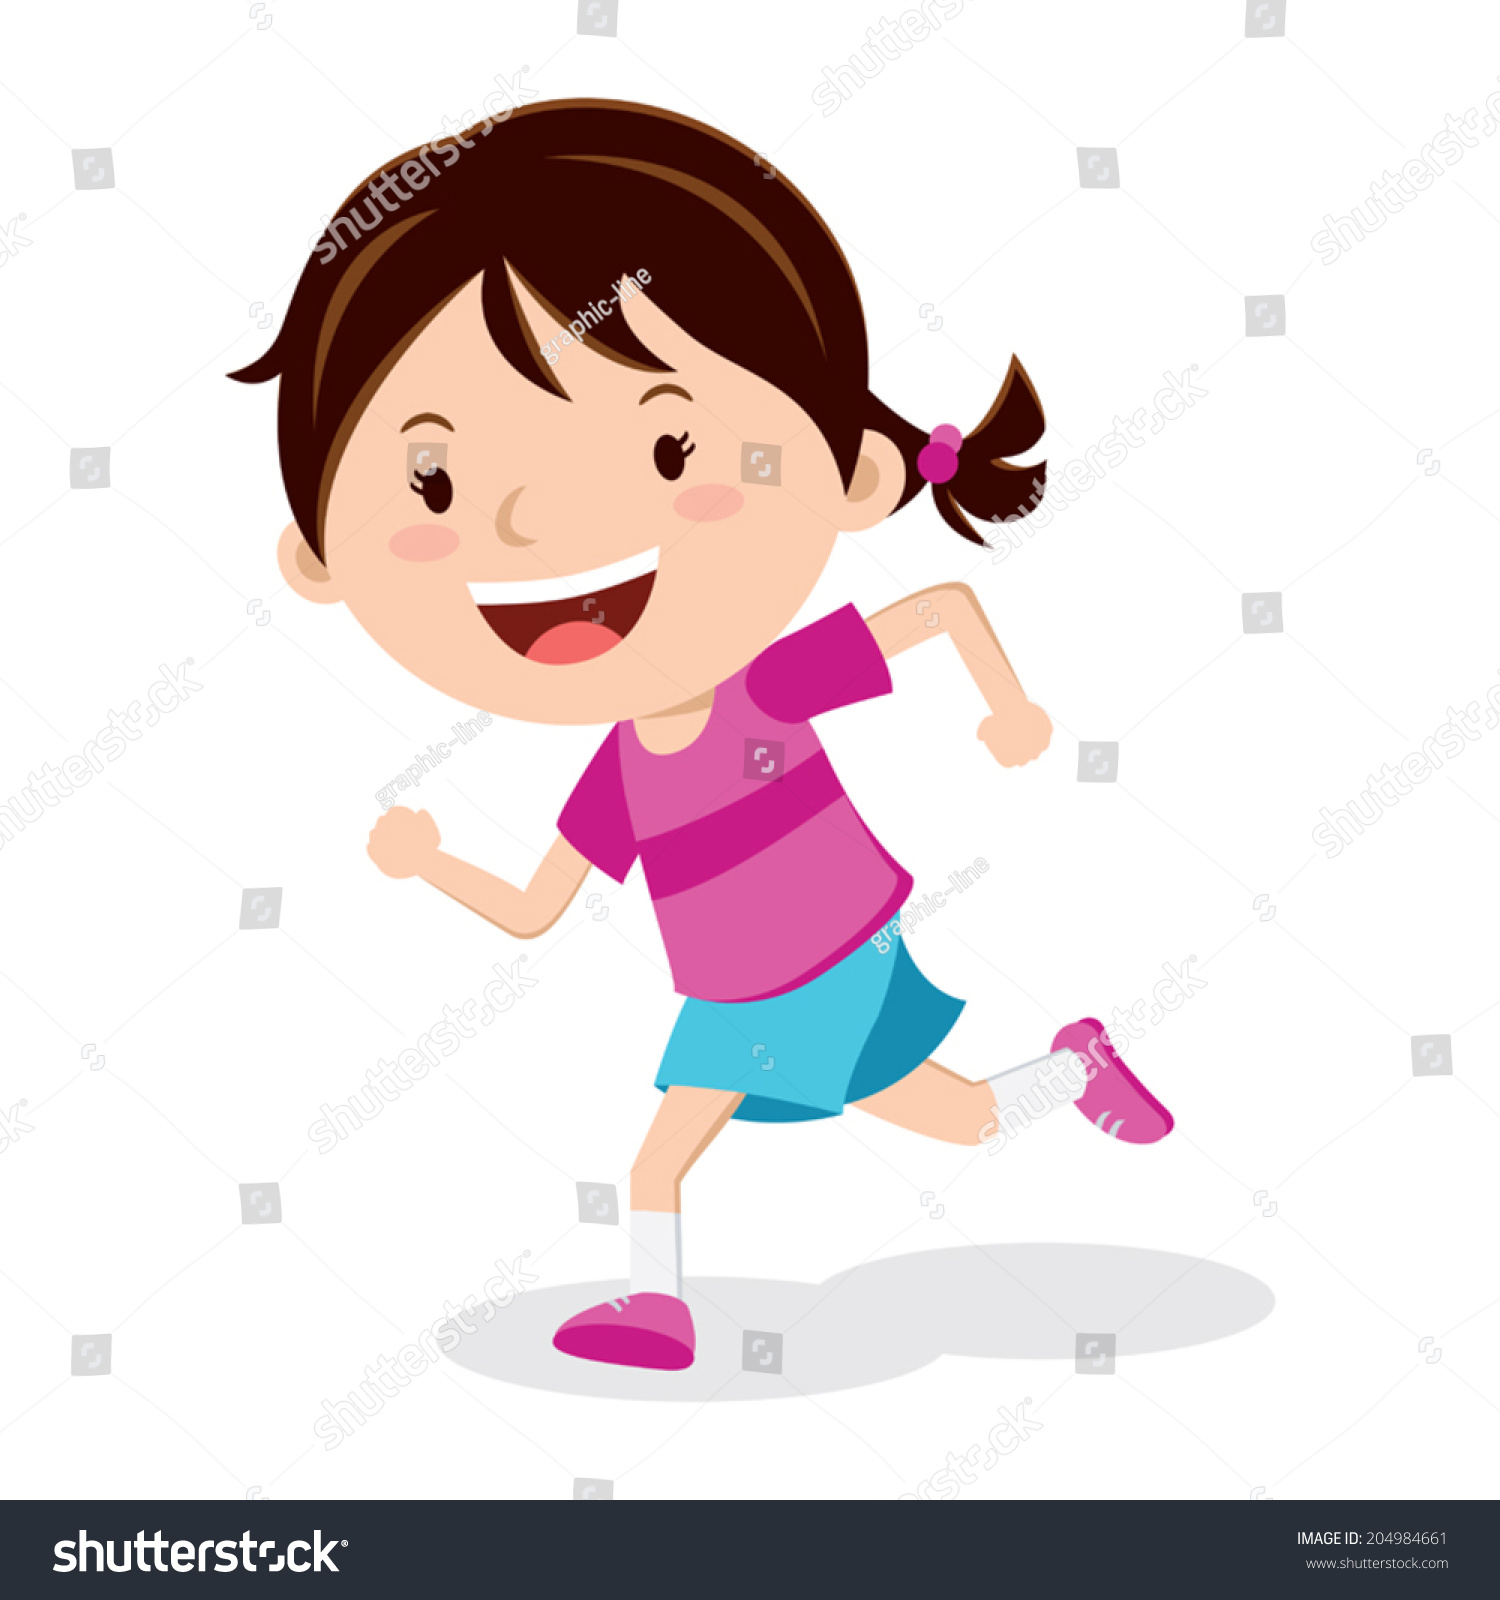 clipart of a girl running - photo #2